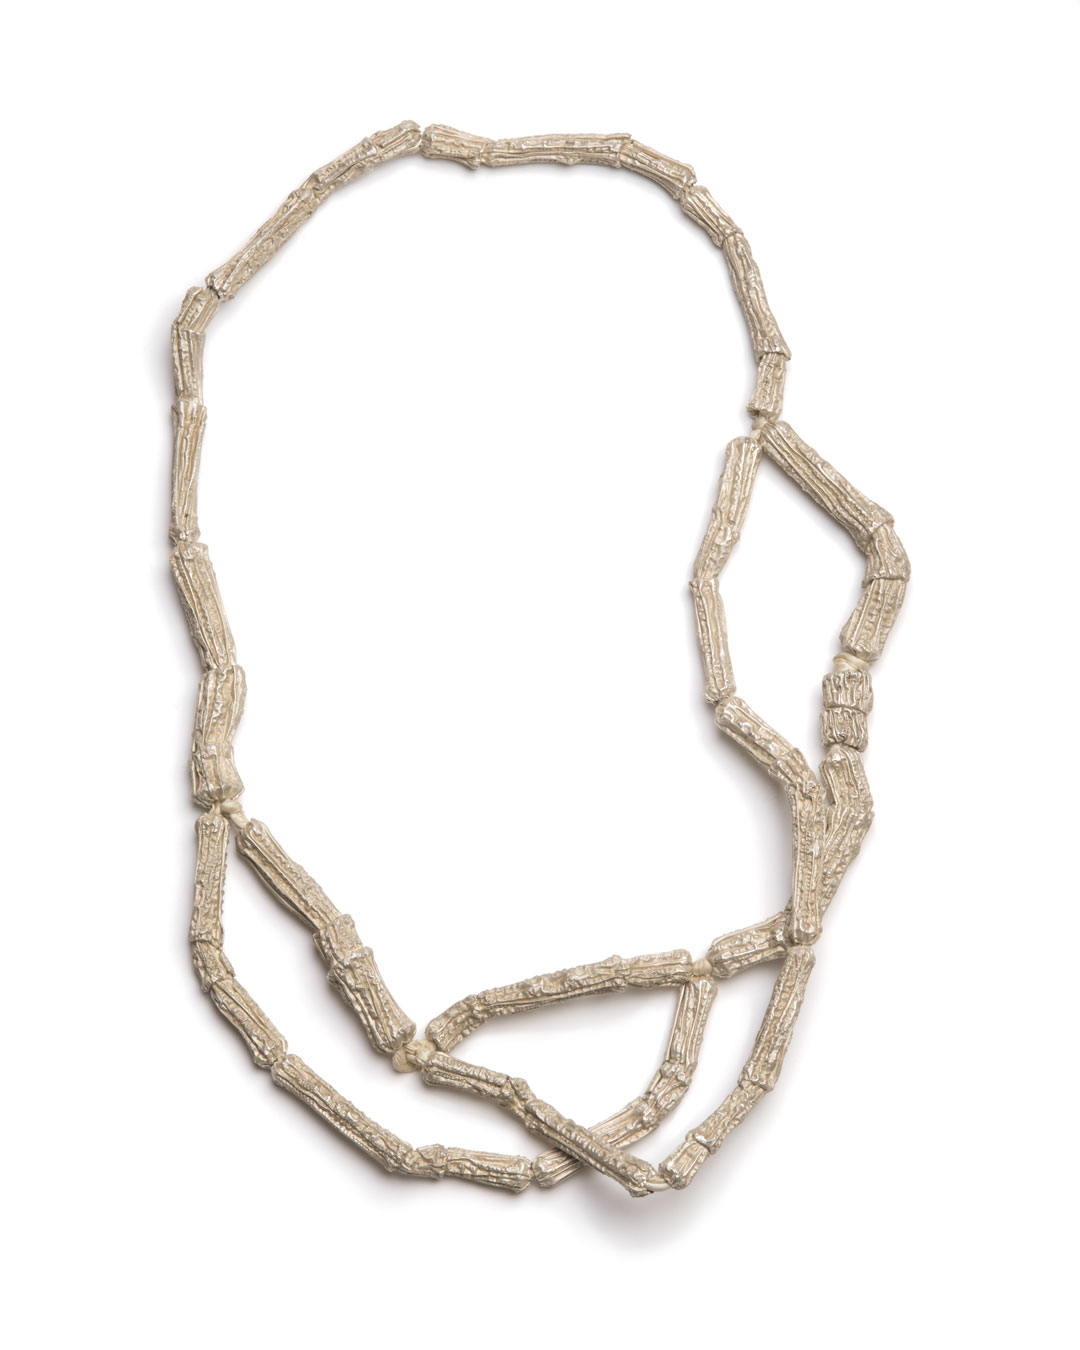 Susanna Loew, Twiggy, 2008, necklace; silver (999 and 935), magnet, silk, 310 x 200 x 8 mm, €2250